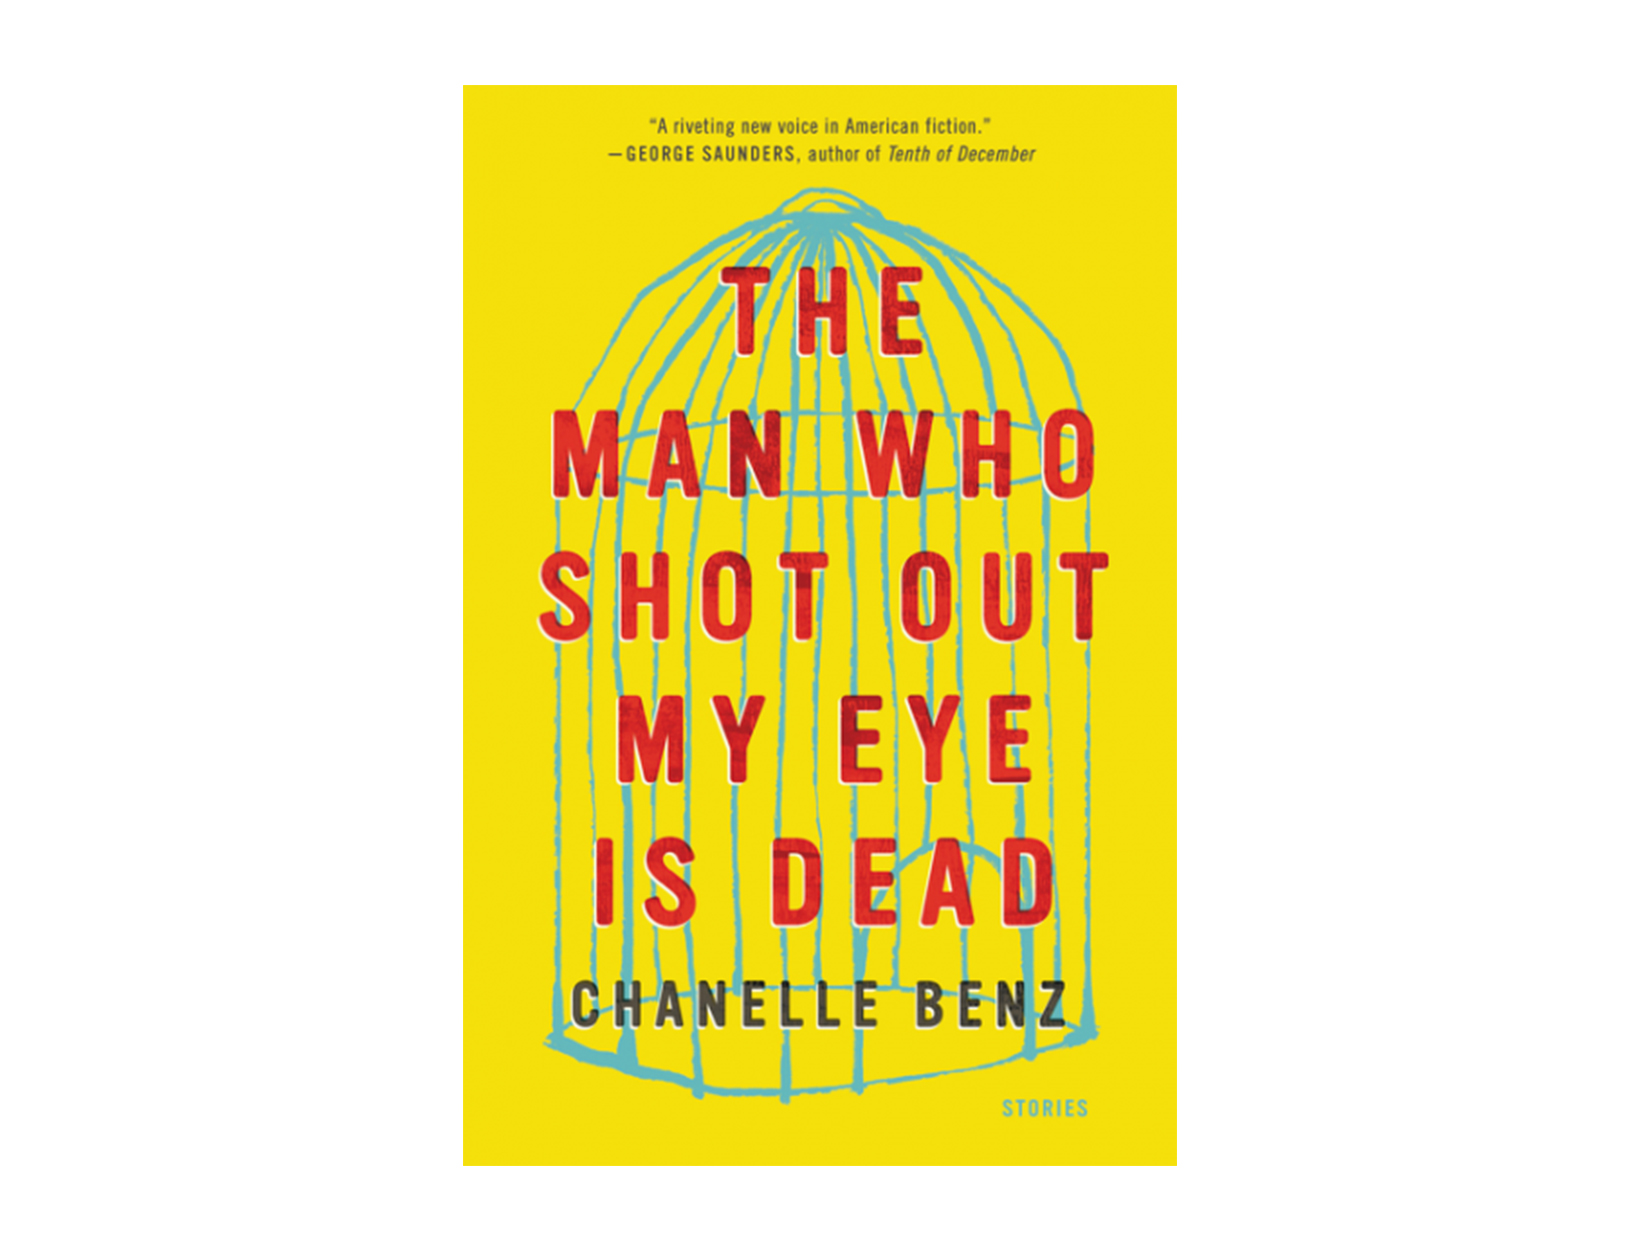 The Man Who Shot Out My Eye is Dead by Chanelle Benz